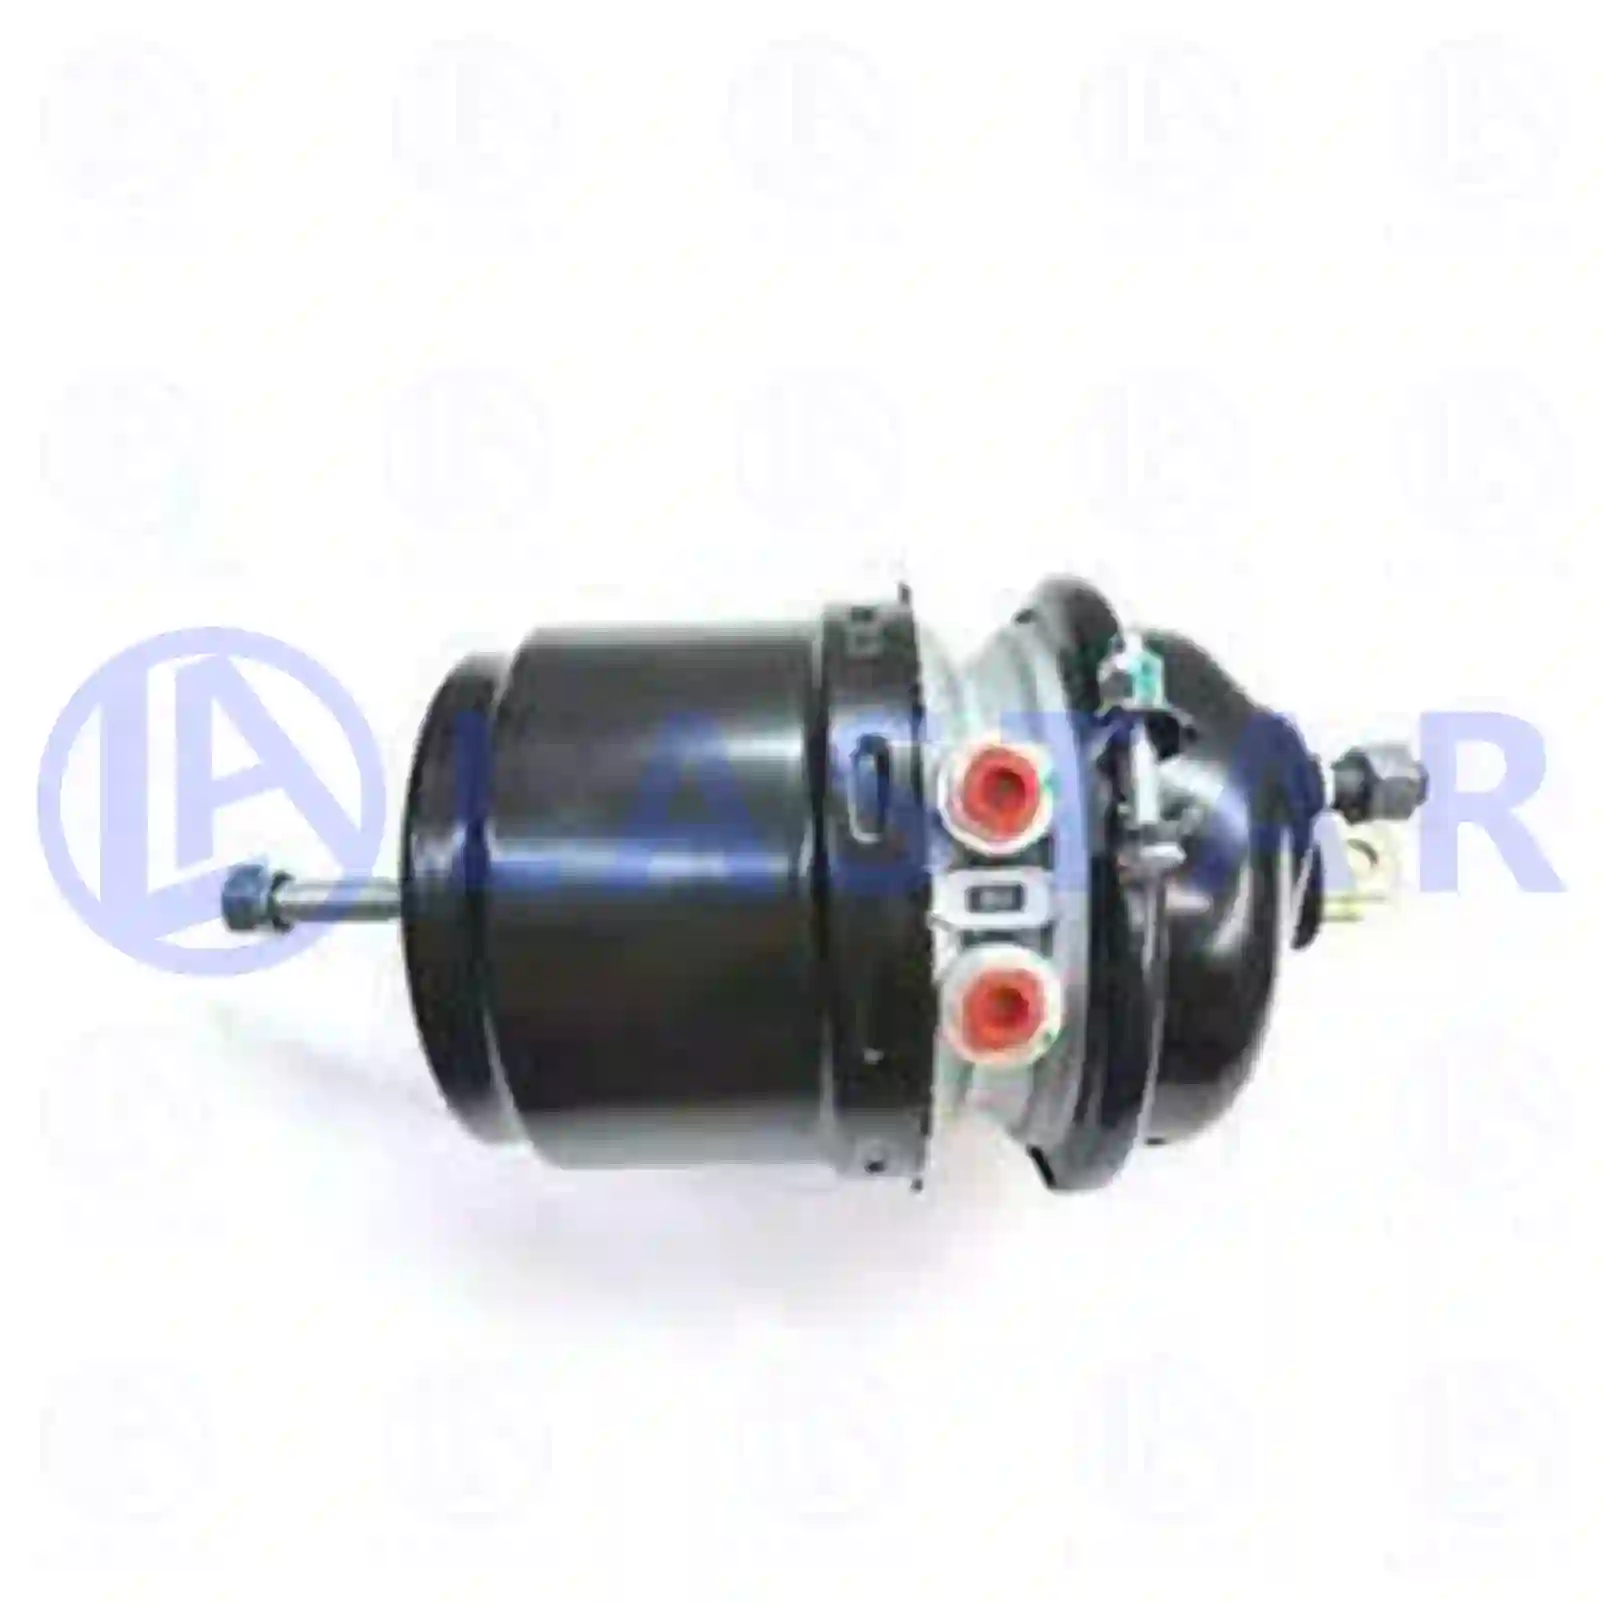 Spring brake cylinder, right, 77715405, 0194208118, , , , ||  77715405 Lastar Spare Part | Truck Spare Parts, Auotomotive Spare Parts Spring brake cylinder, right, 77715405, 0194208118, , , , ||  77715405 Lastar Spare Part | Truck Spare Parts, Auotomotive Spare Parts